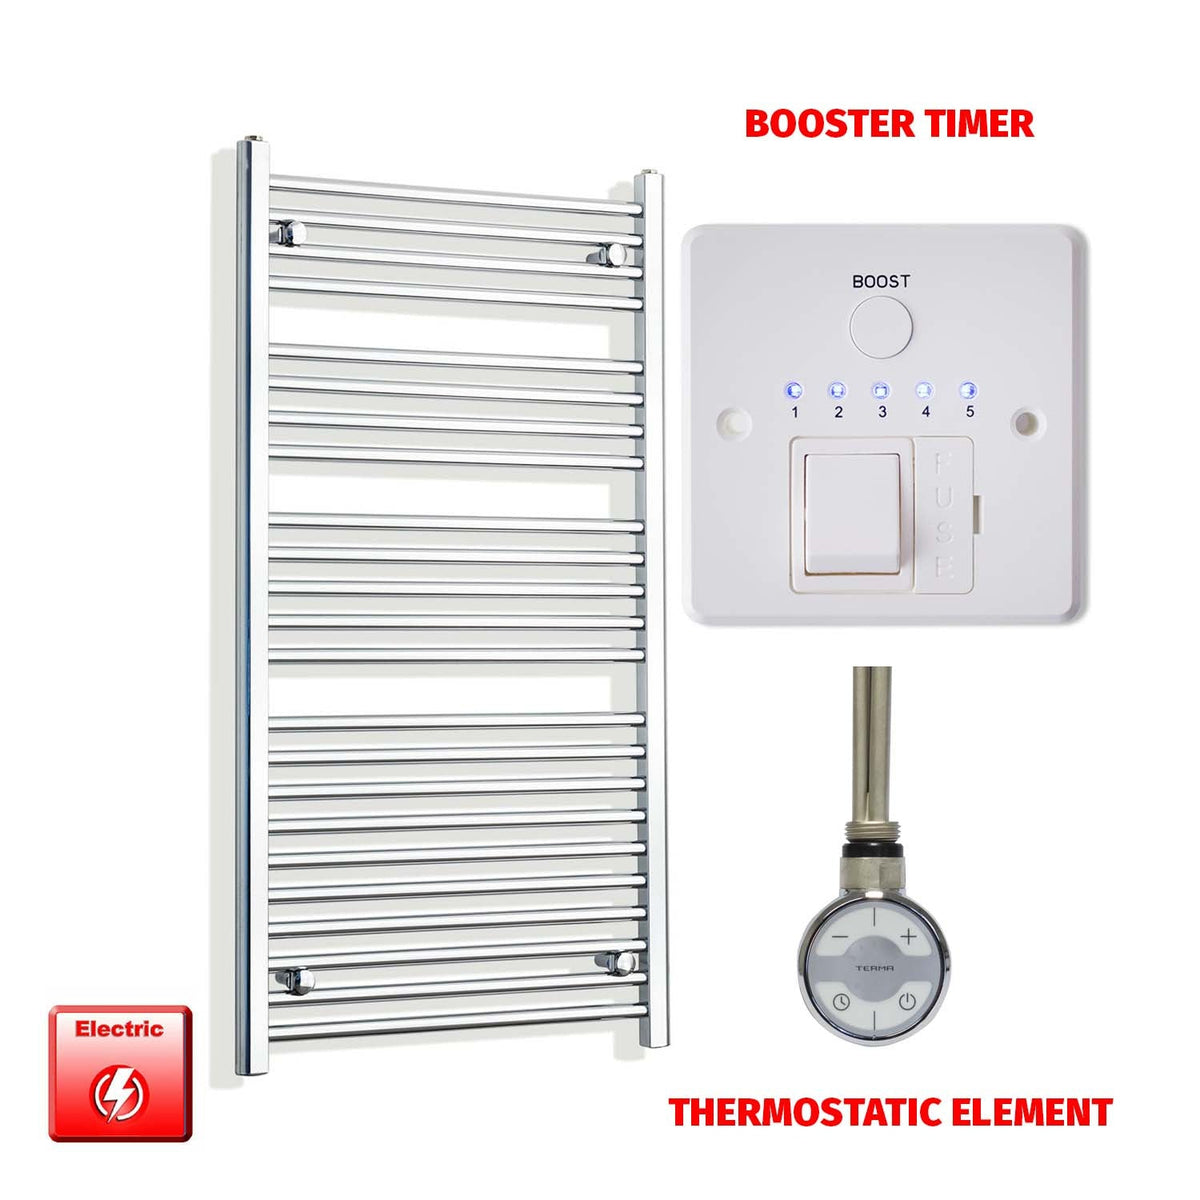 1200mm High 550mm Wide Pre-Filled Electric Heated Towel Radiator Chrome HTR MOA Thermostatic element Booster timer